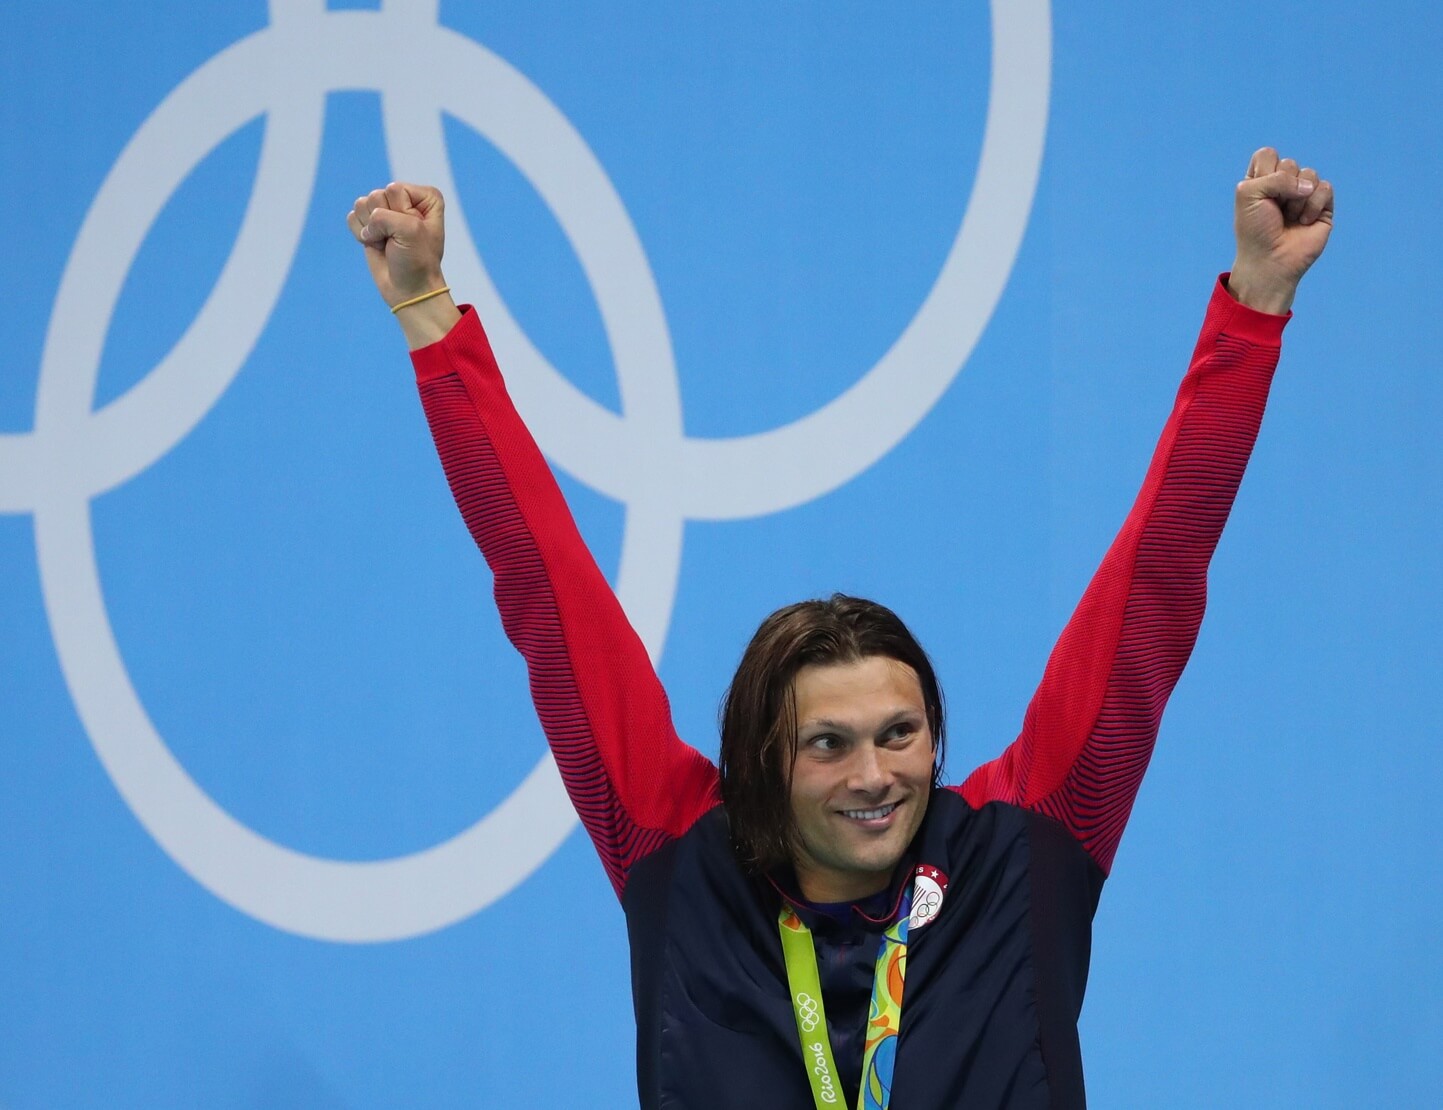 cody-miller-victory-pose-100-breast-2016-rio-olympics